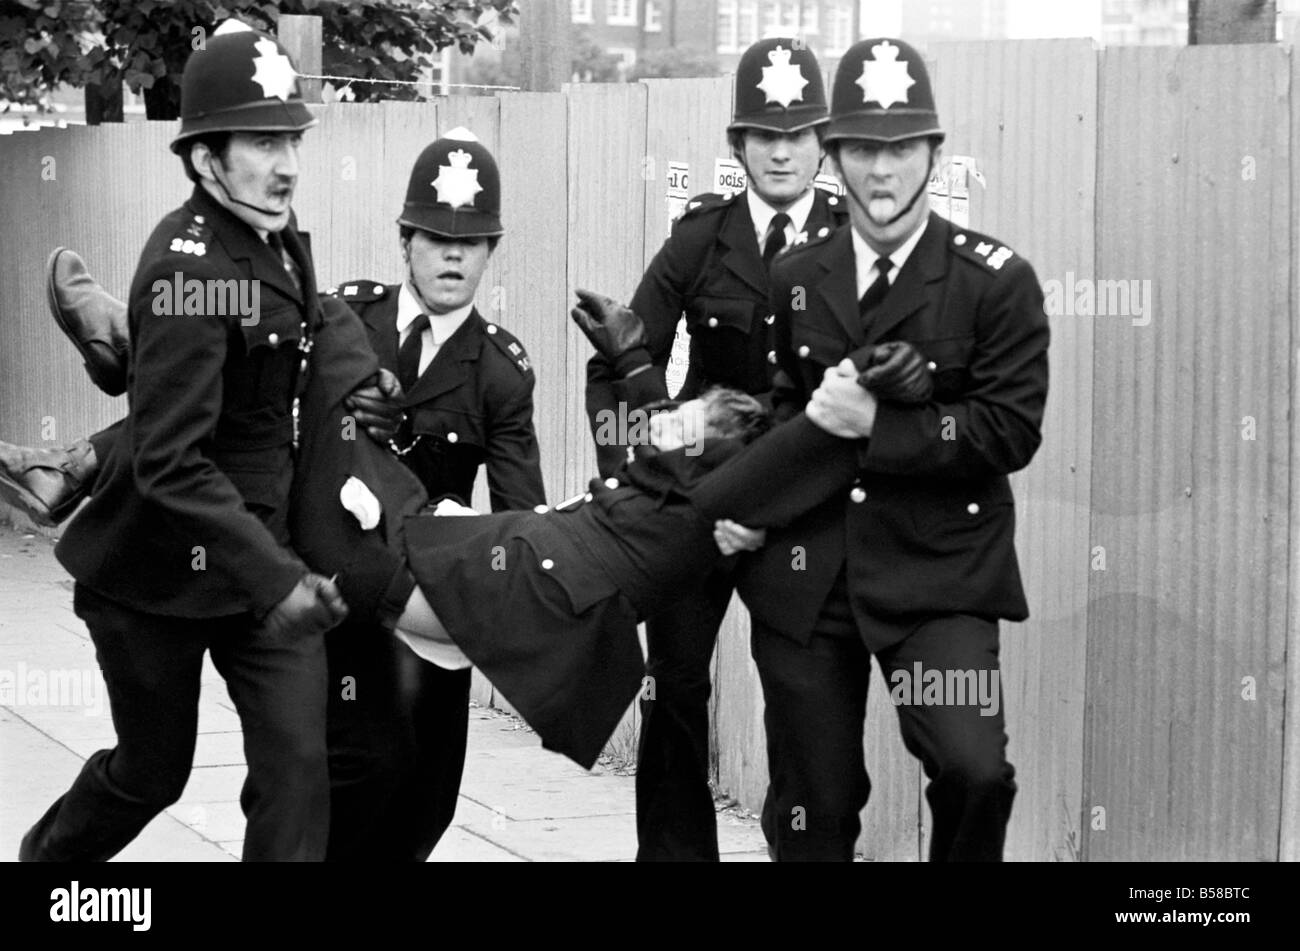 Lewisham Riot 1977: An injured policeman is carried away from the Lewisham riot by colleagues. The riot was sparked by a National Front march through the centre of town, which was confronted by a left wing counter demonstration. August 1977 77-04357-009 Stock Photo